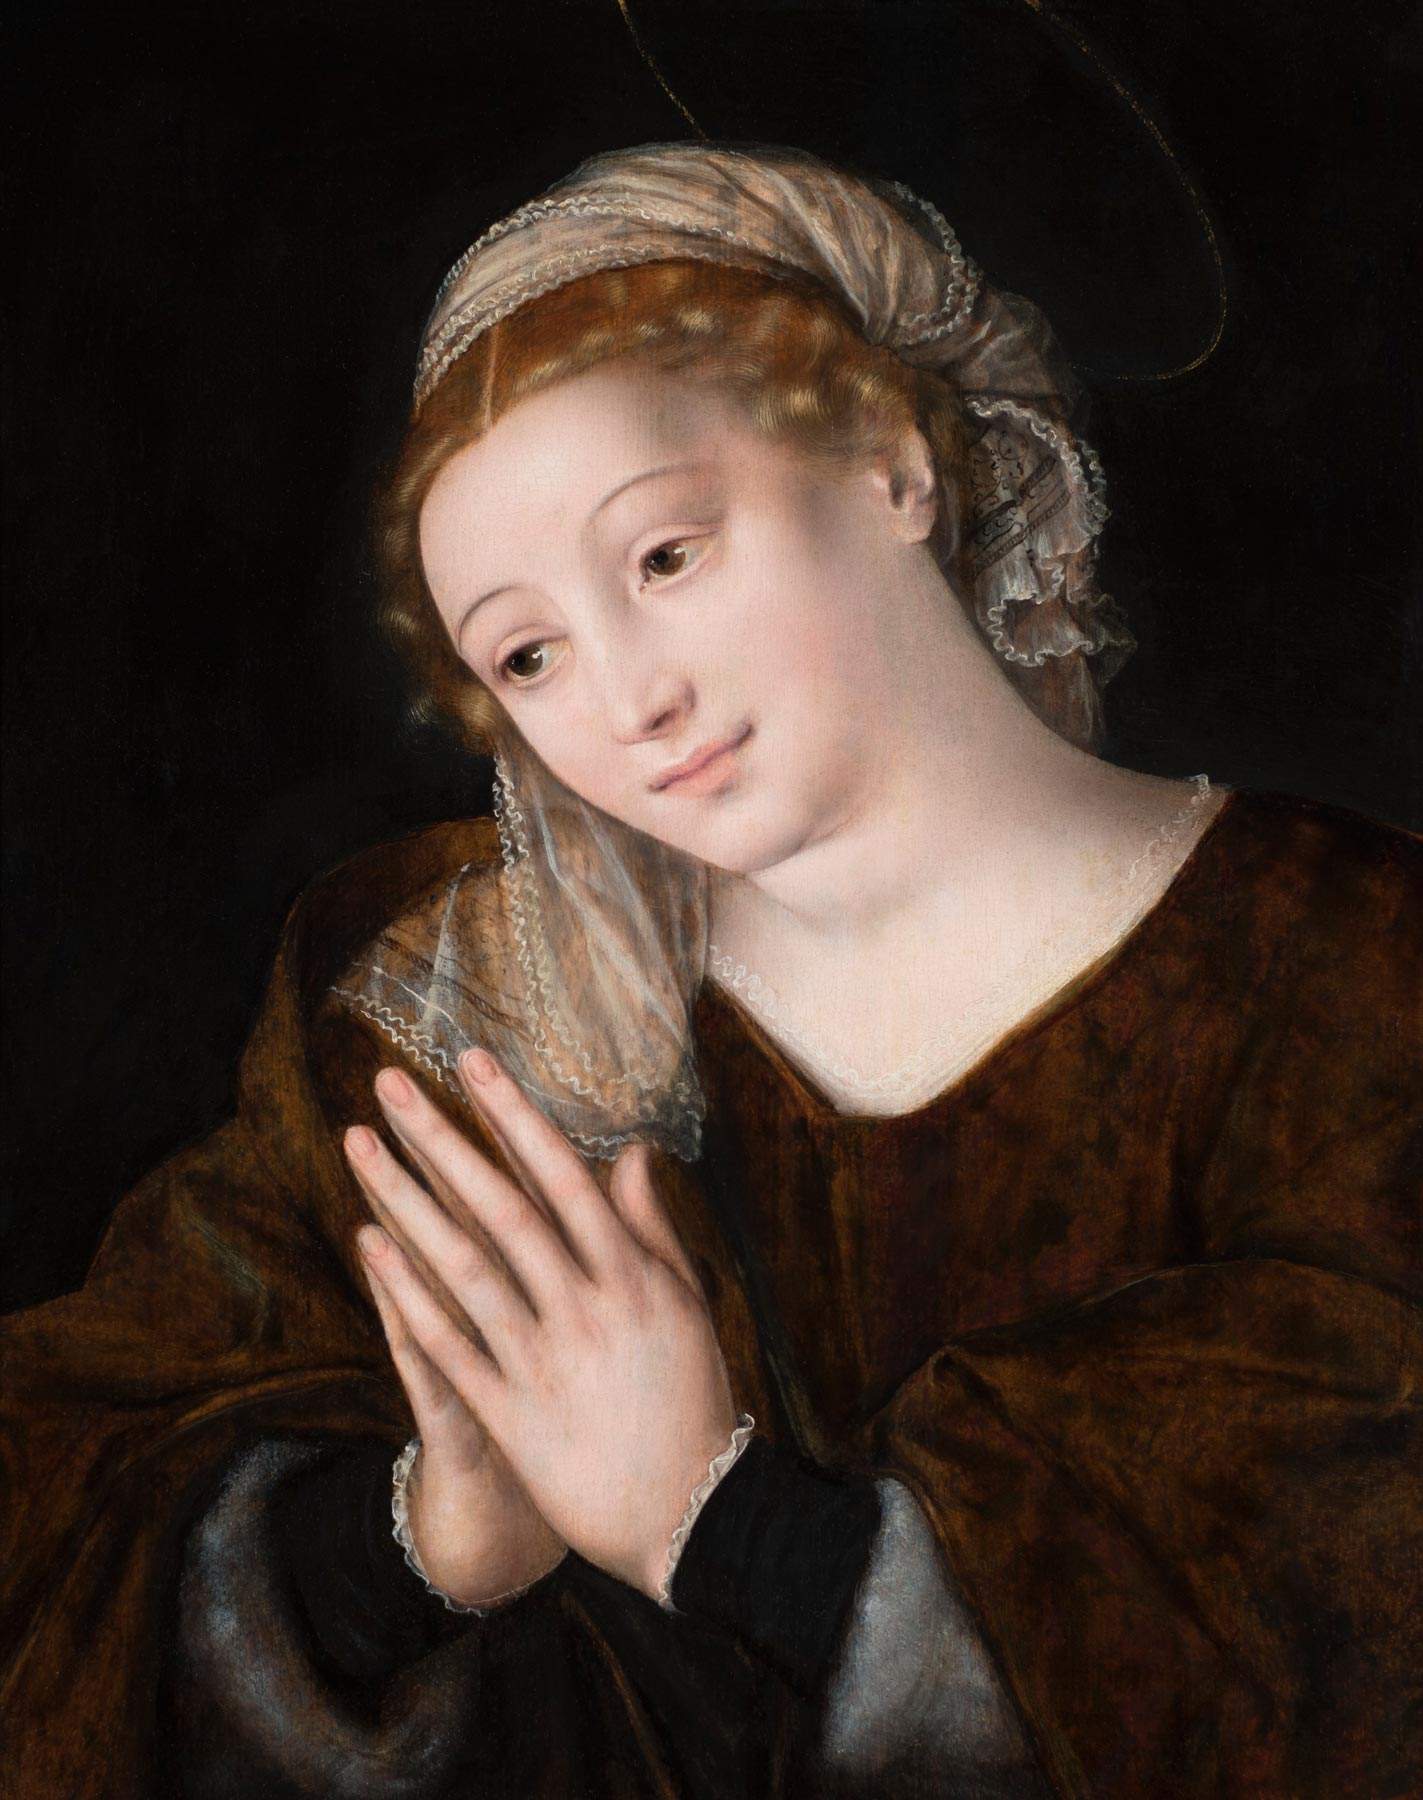 Venice, San Giorgio Abbey acquires a rare painting by Jan Matsys